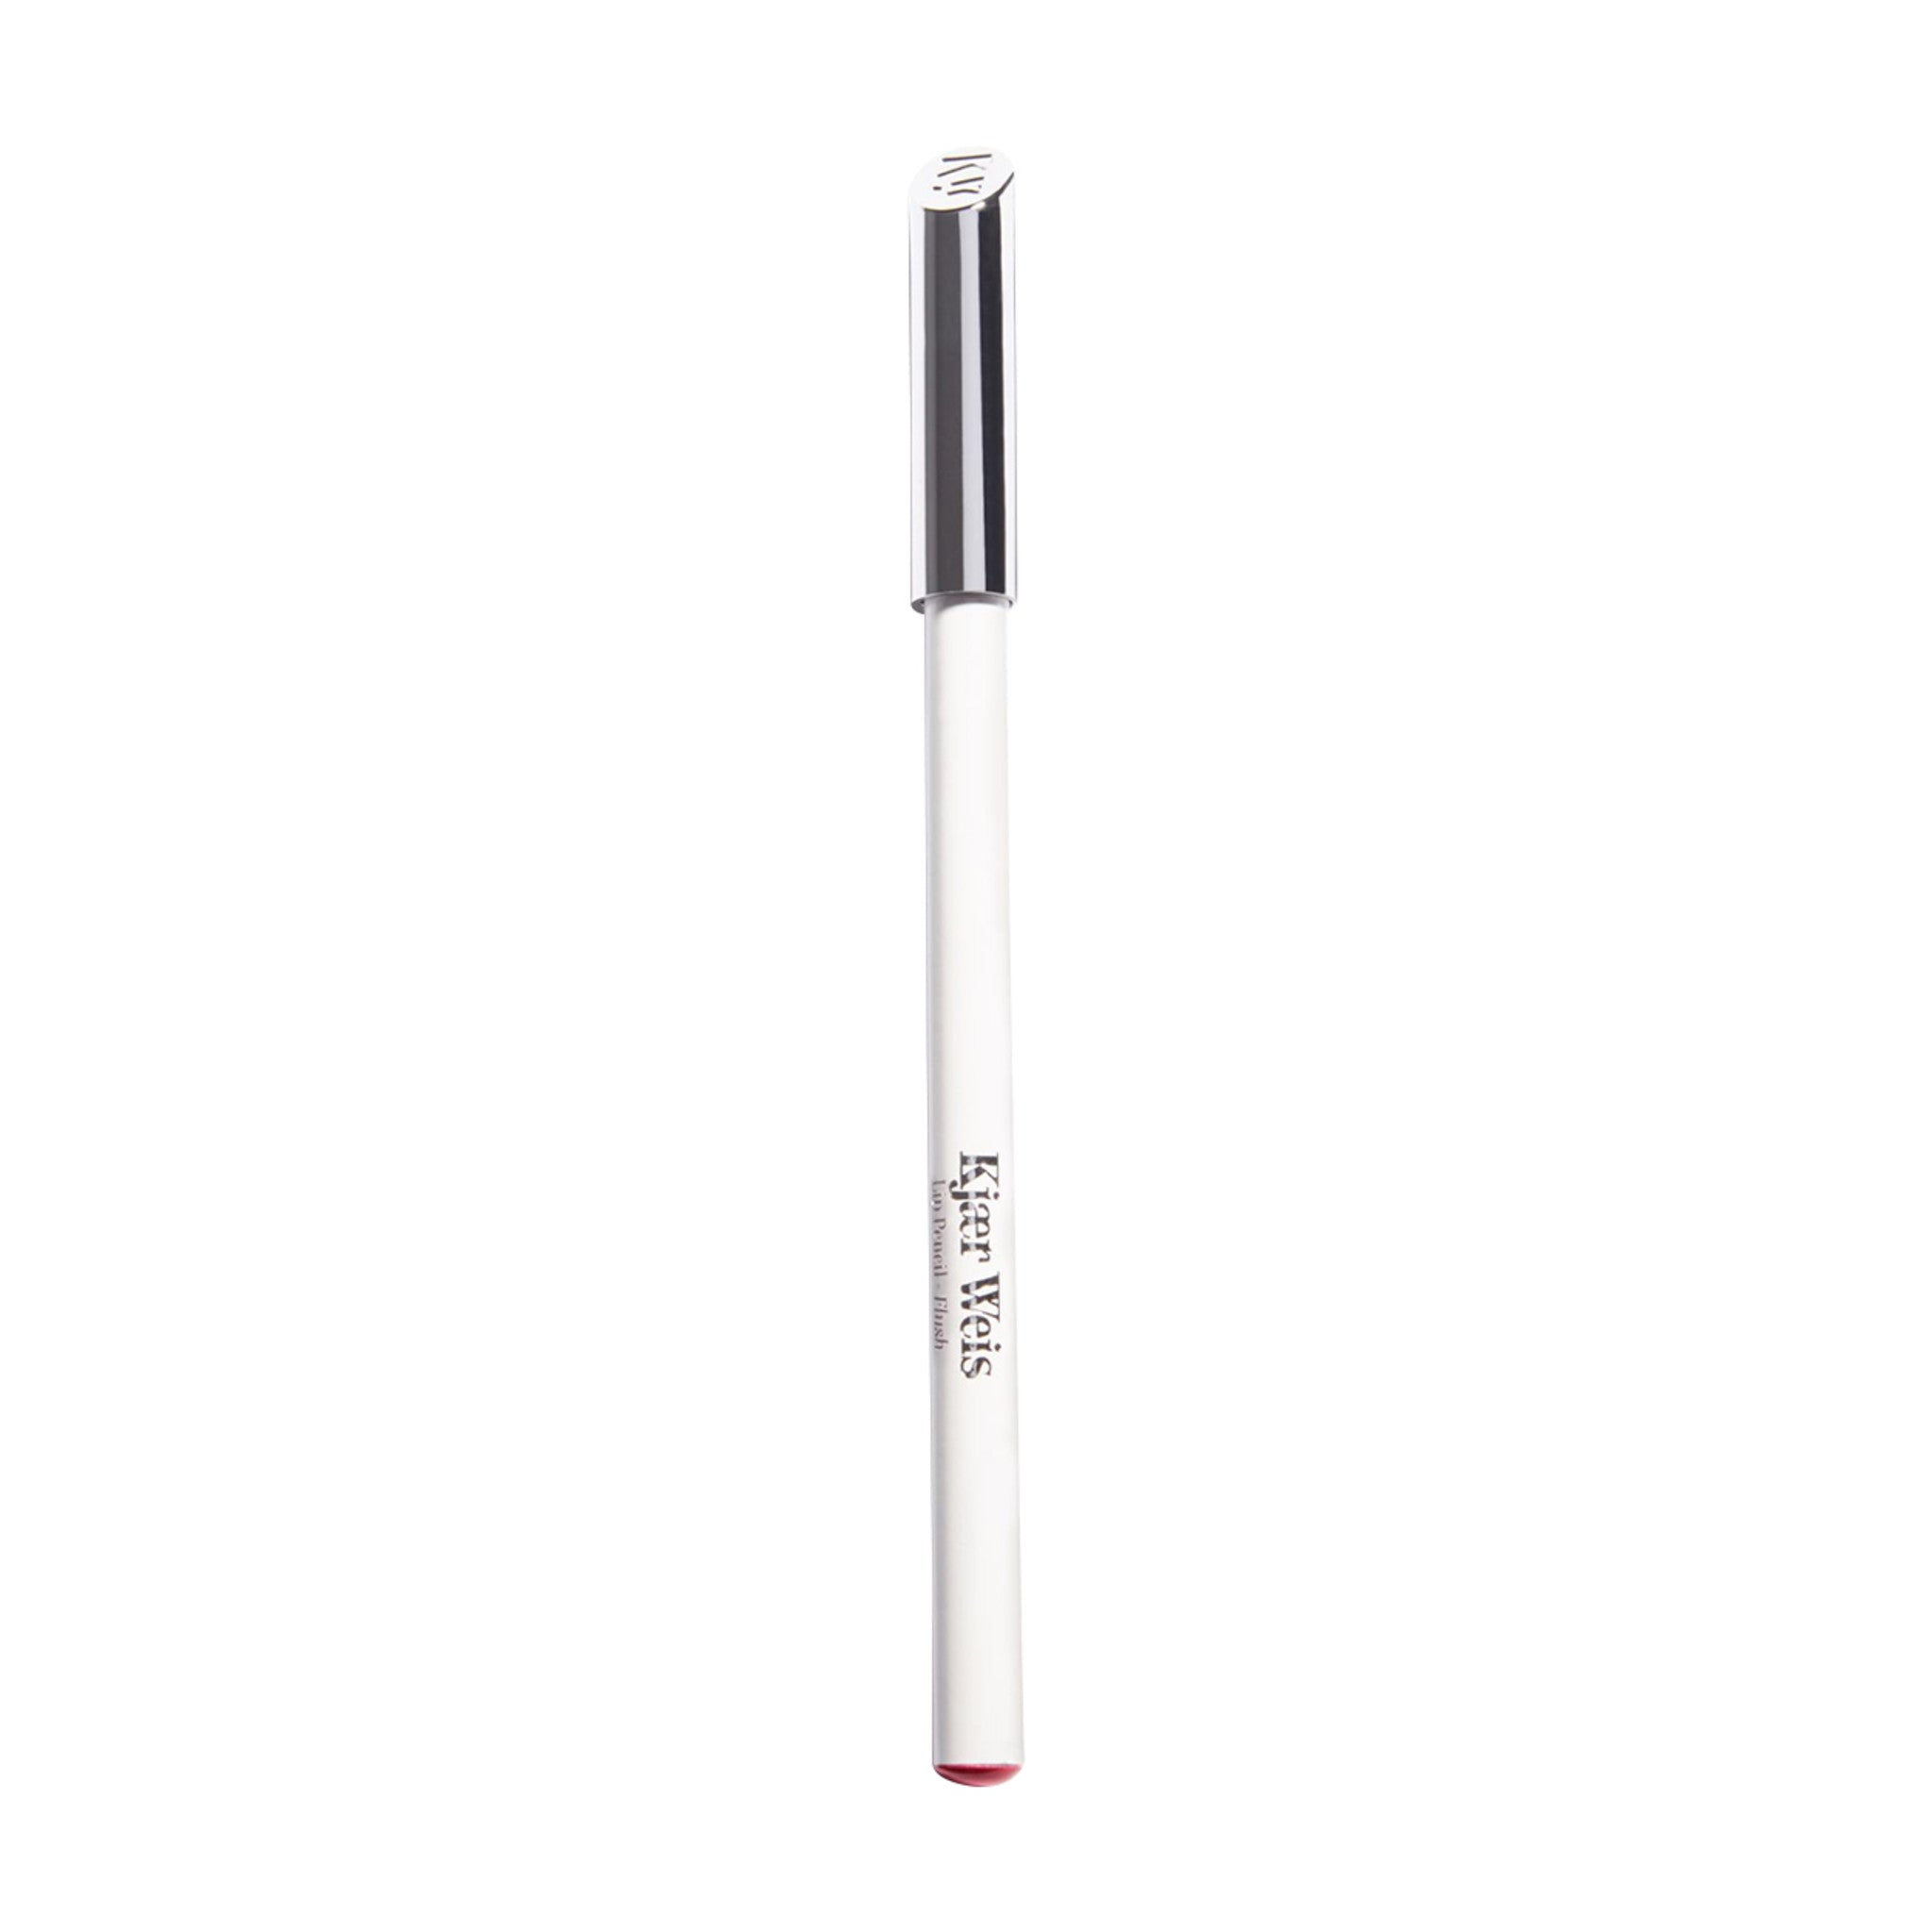 Kjaer Weis Lip Pencil Color/Shade variant: Flush main image. This product is in the color pink